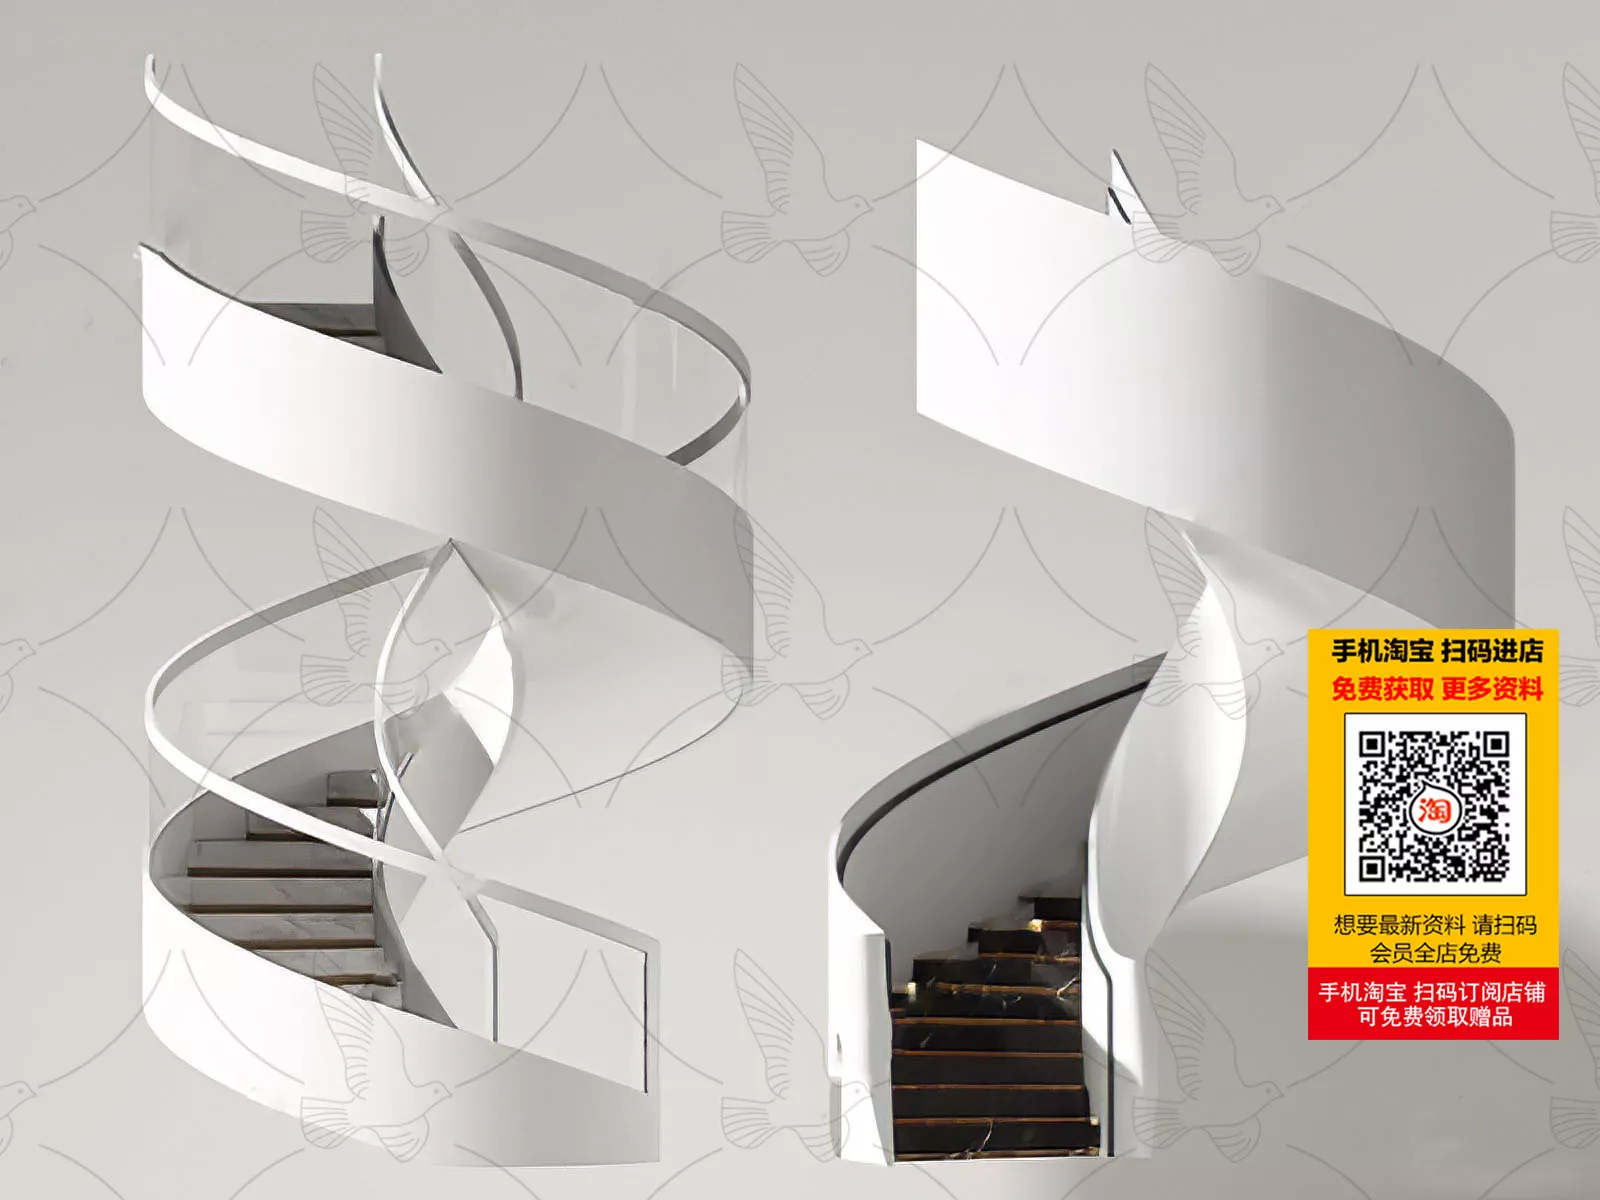 MODERN STAIRS - SKETCHUP 3D MODEL - VRAY OR ENSCAPE - ID14323